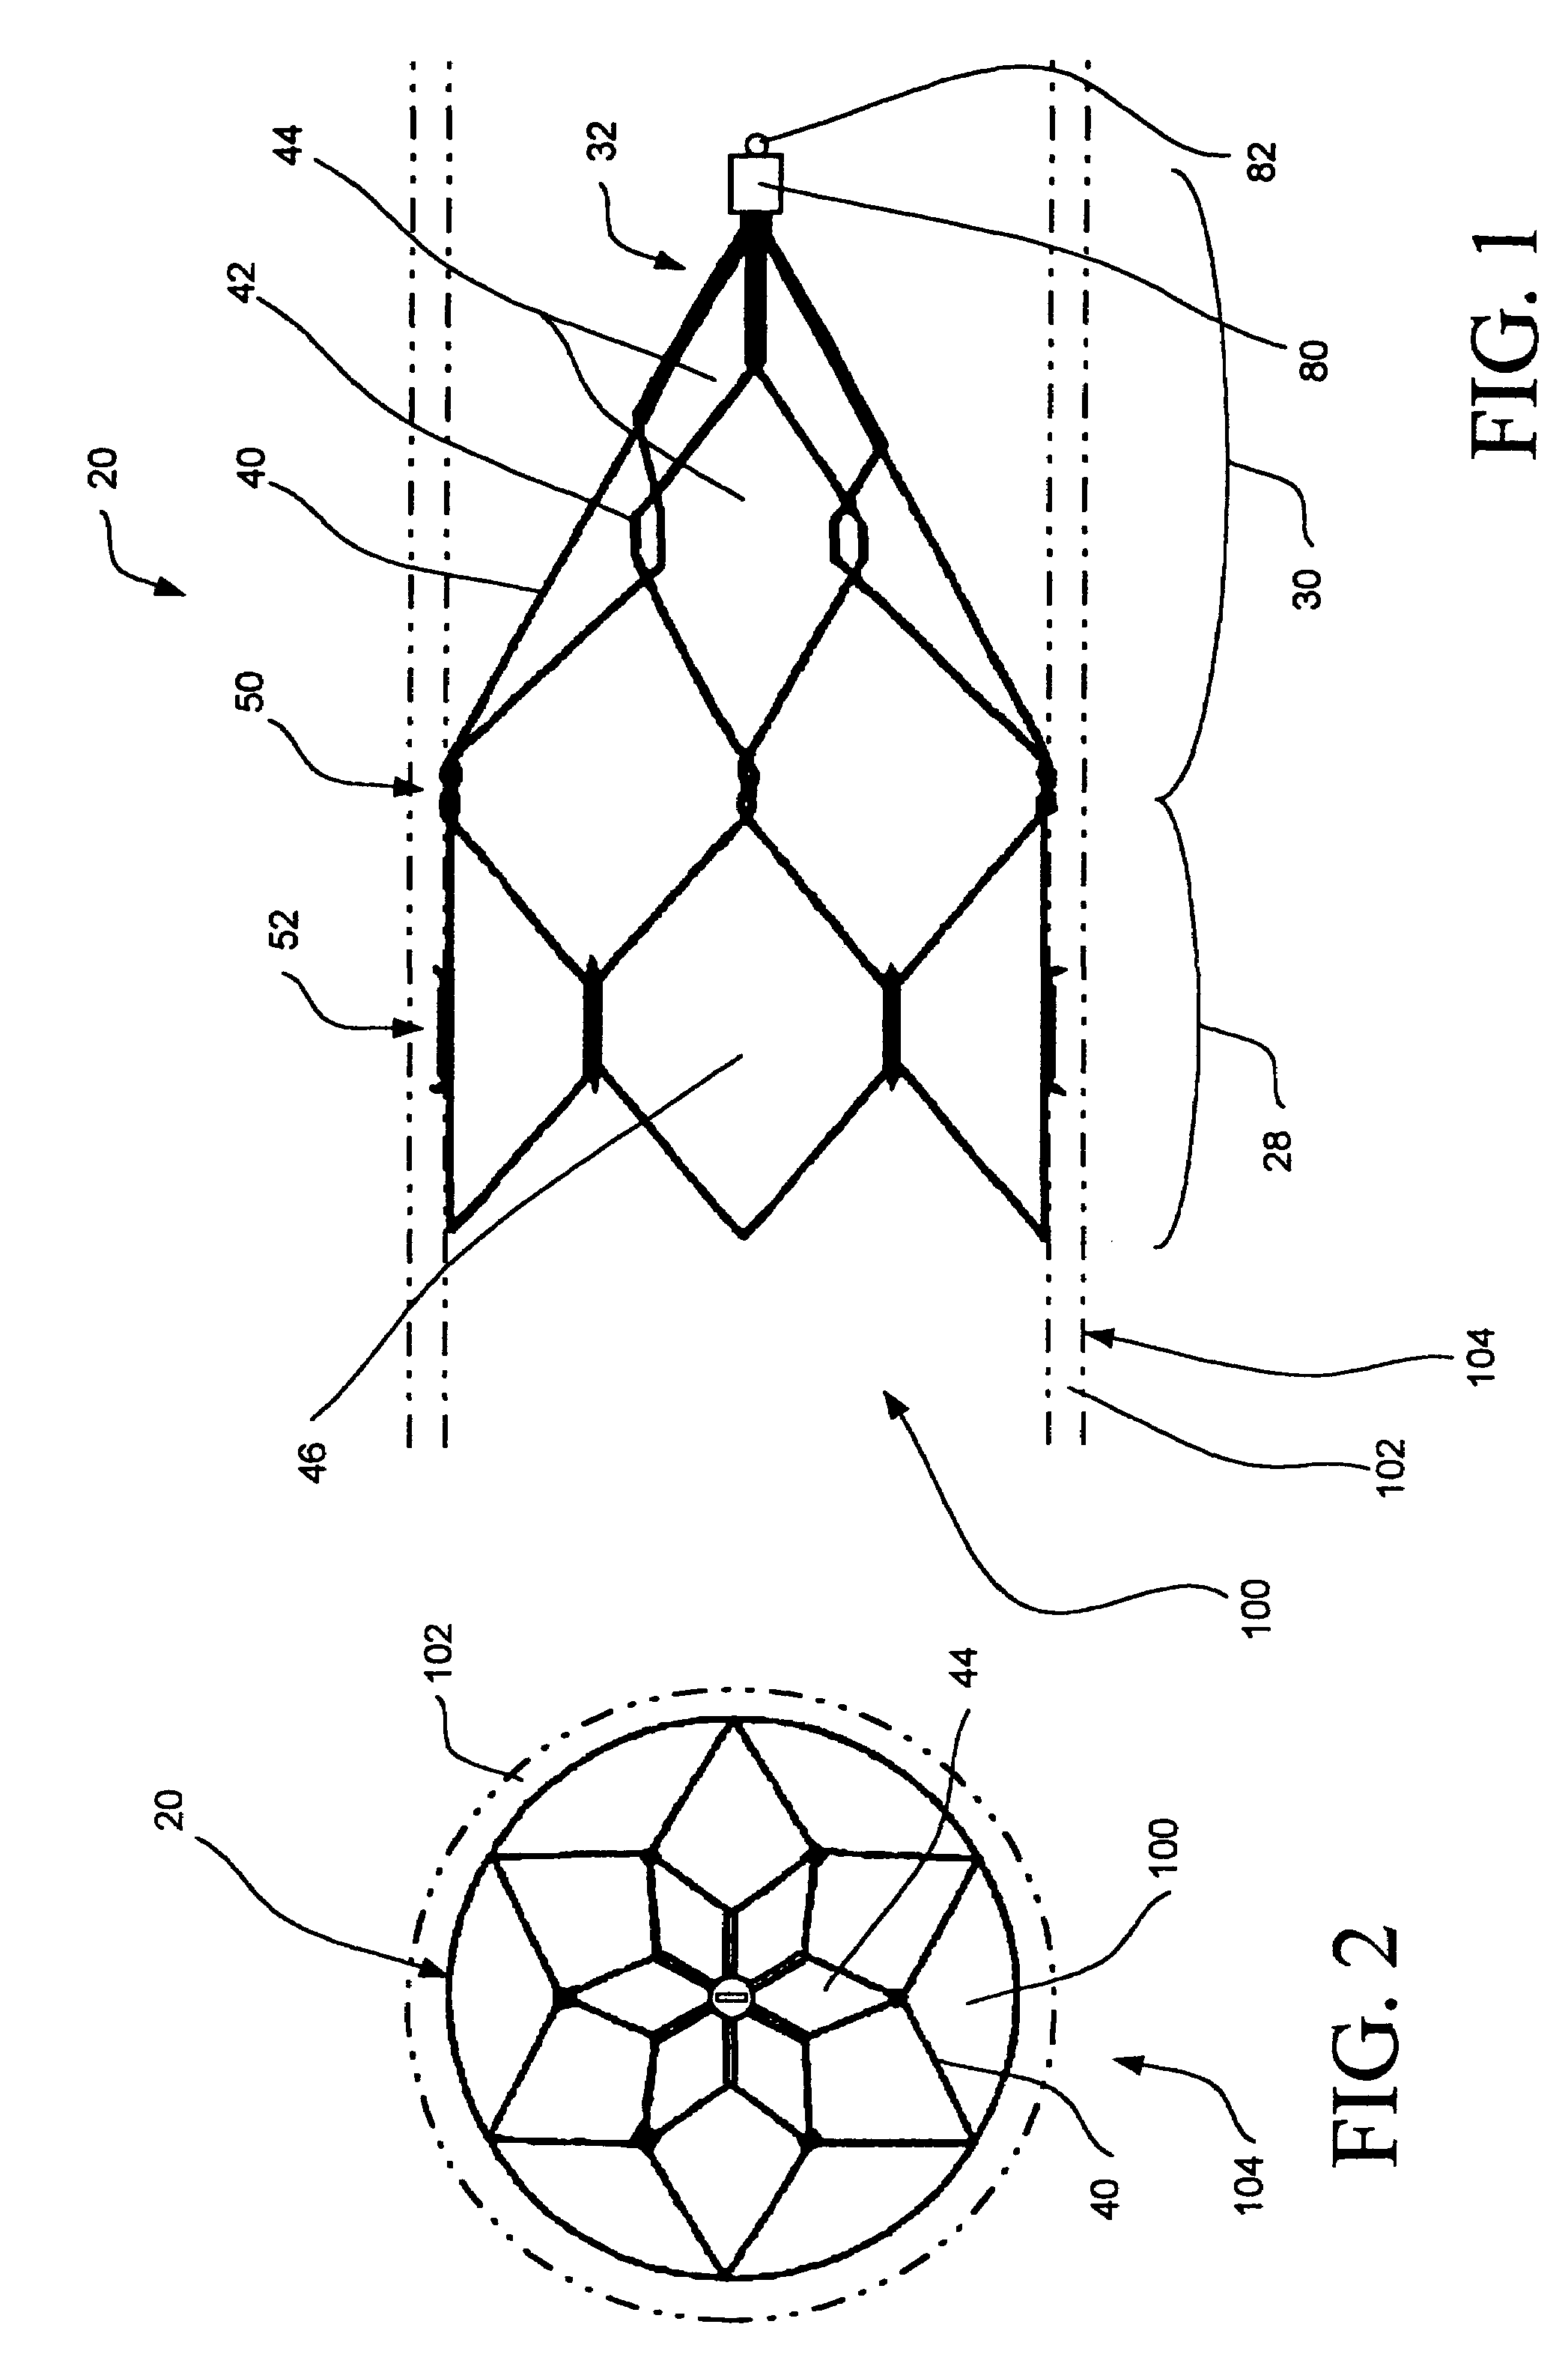 Intravascular filtering devices and methods